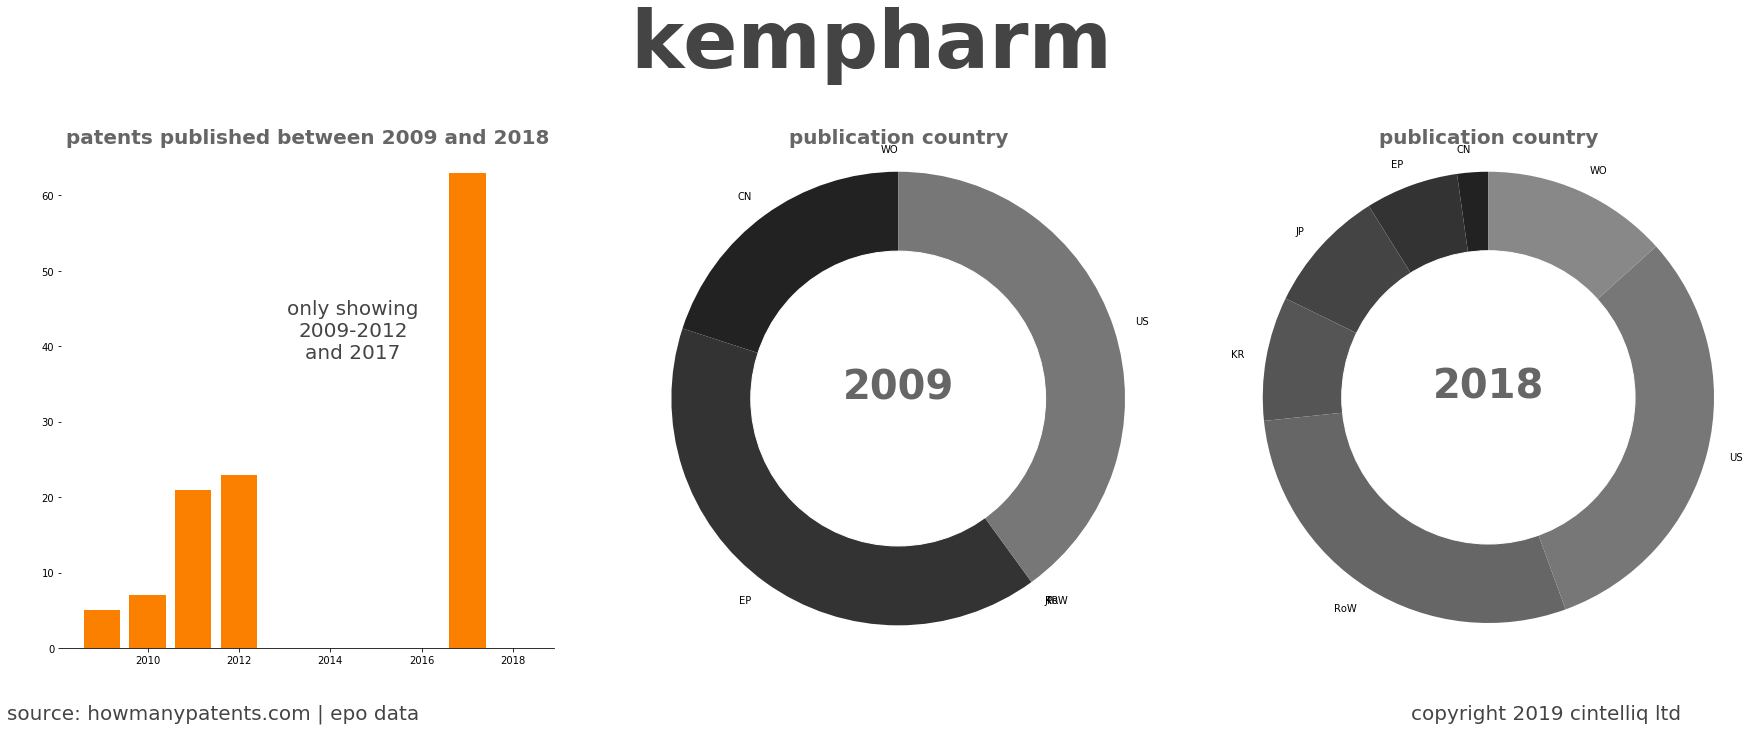 summary of patents for Kempharm